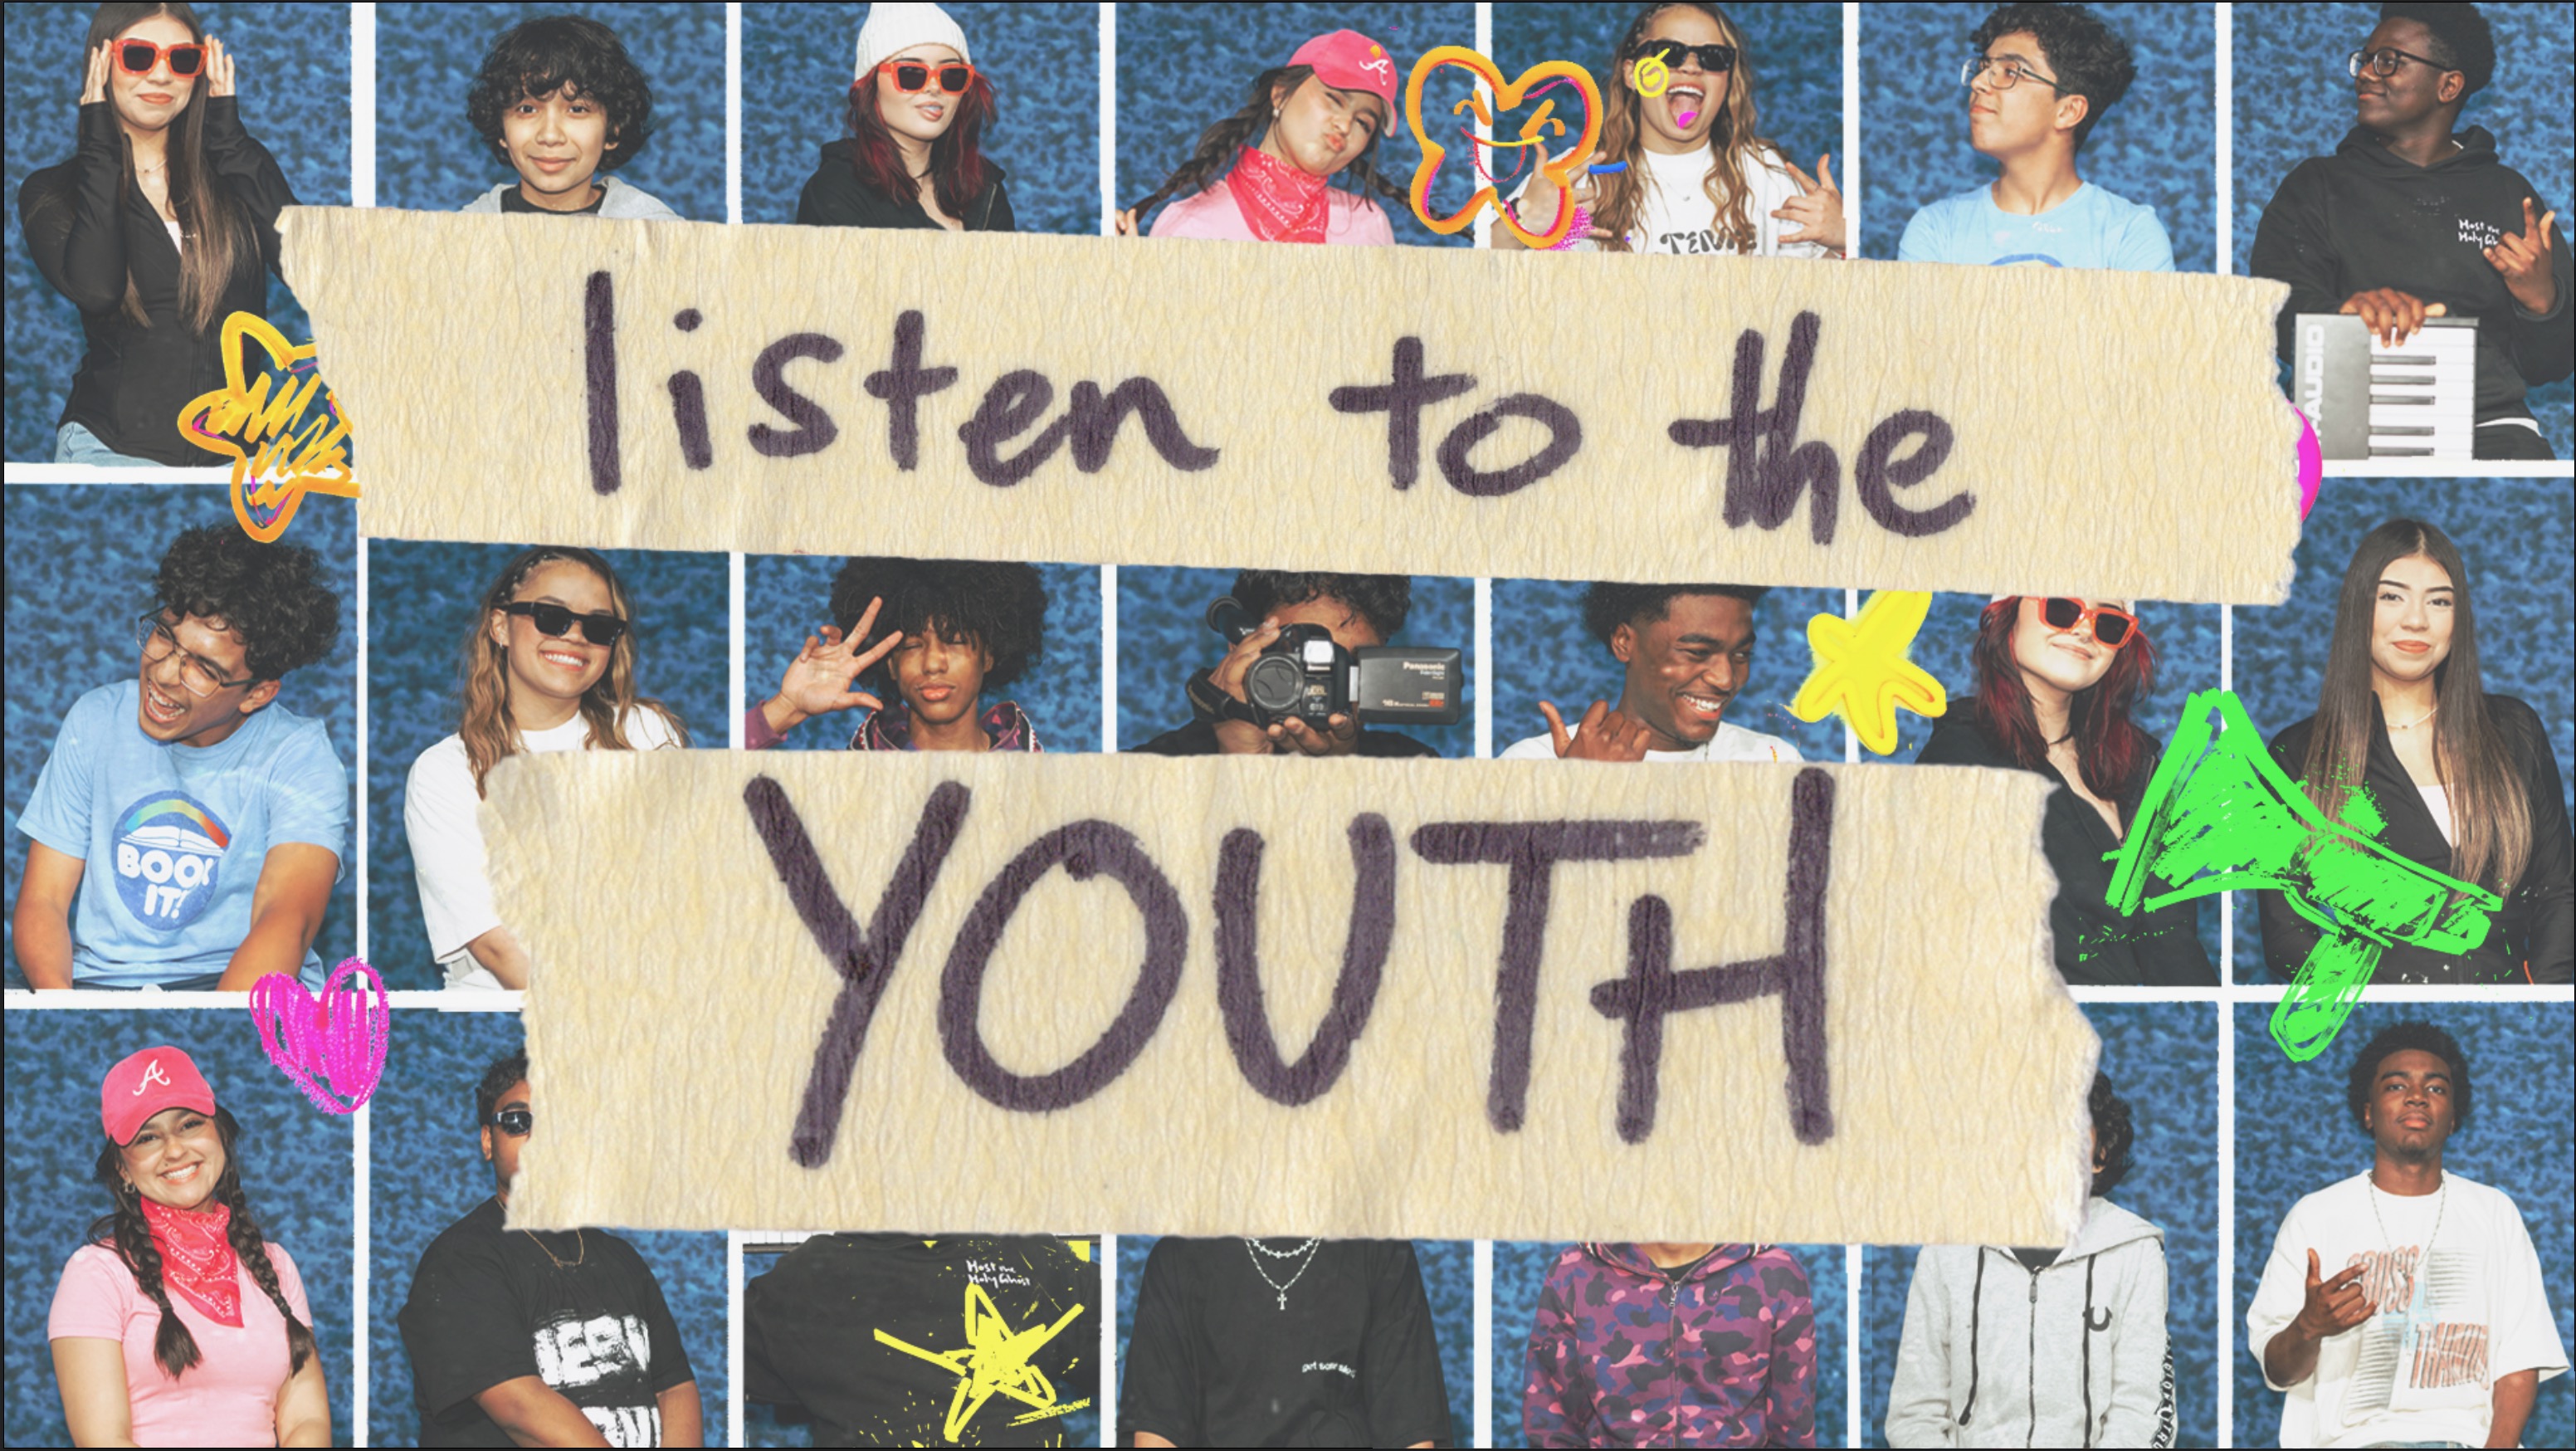 Listen to the Youth- FCY Series  at the Midtown campus